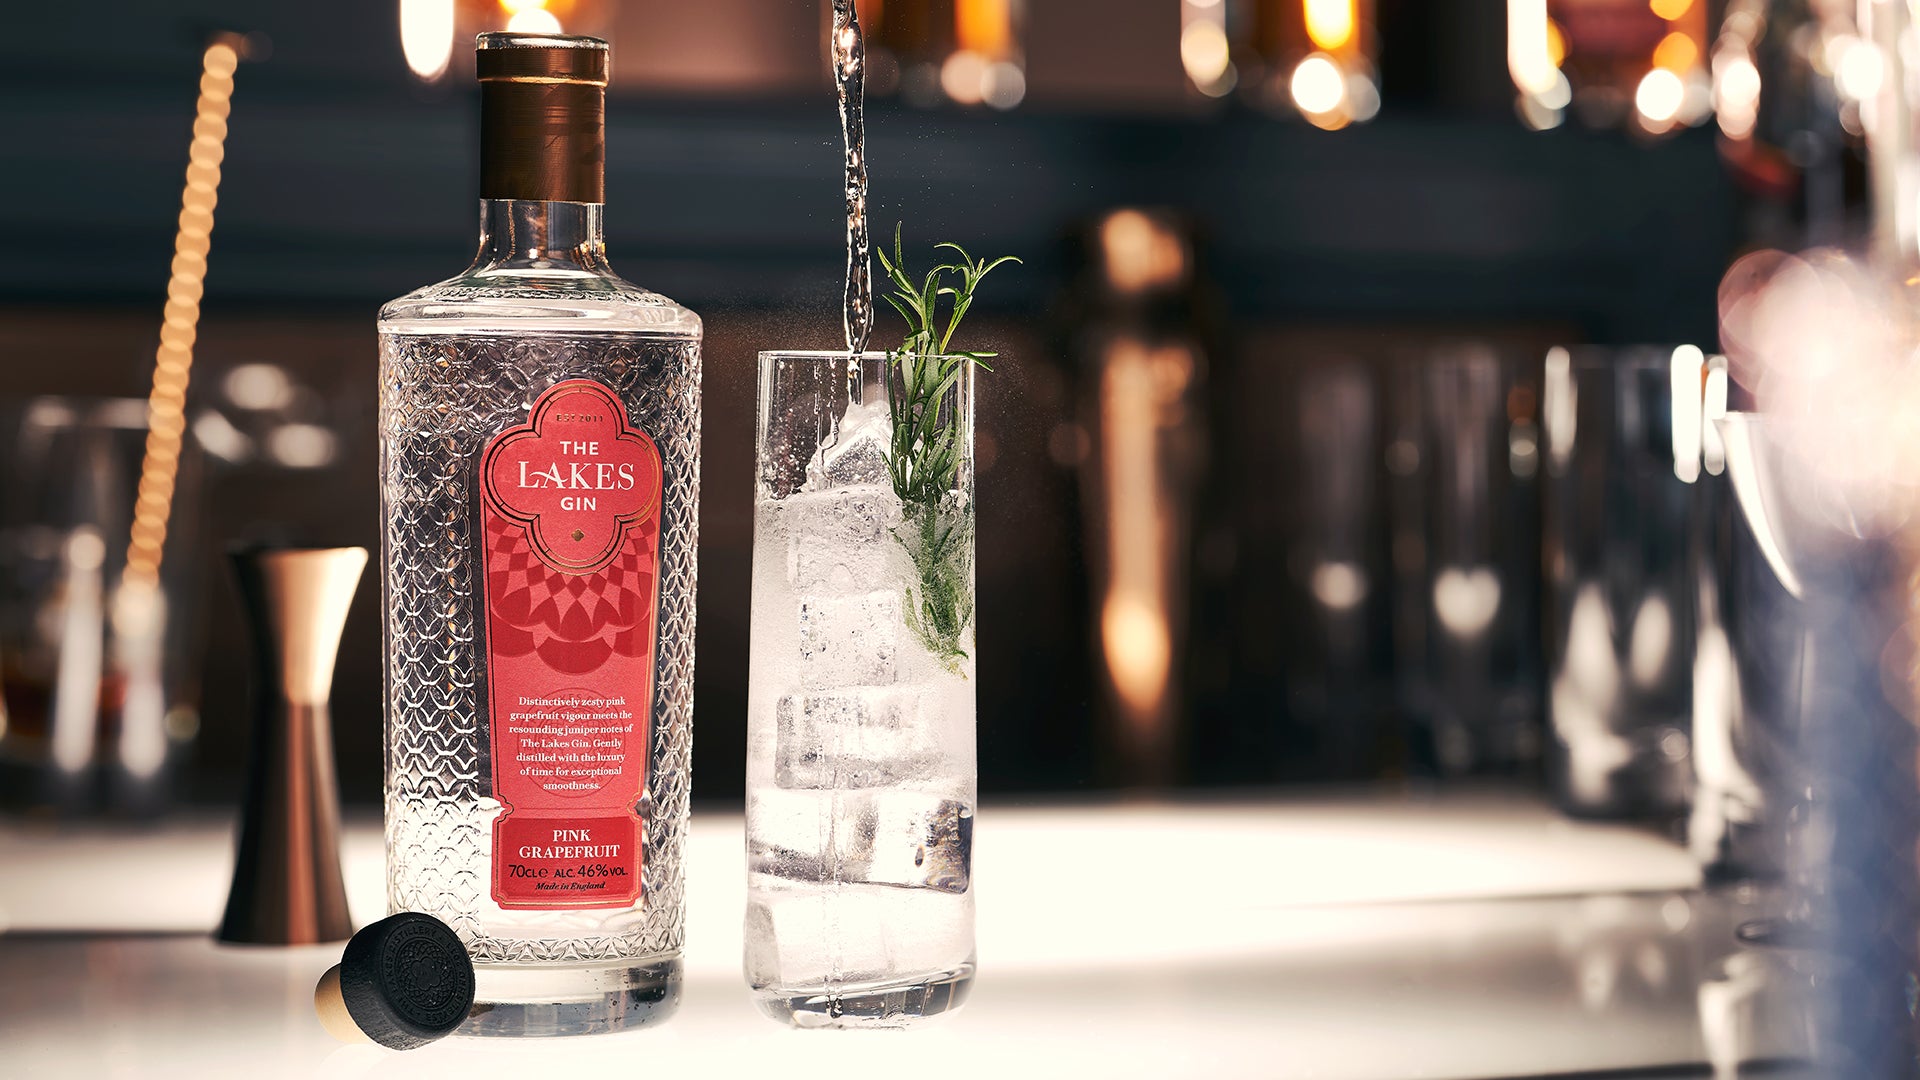 Outstanding recognition for The Lakes Pink Grapefruit Gin